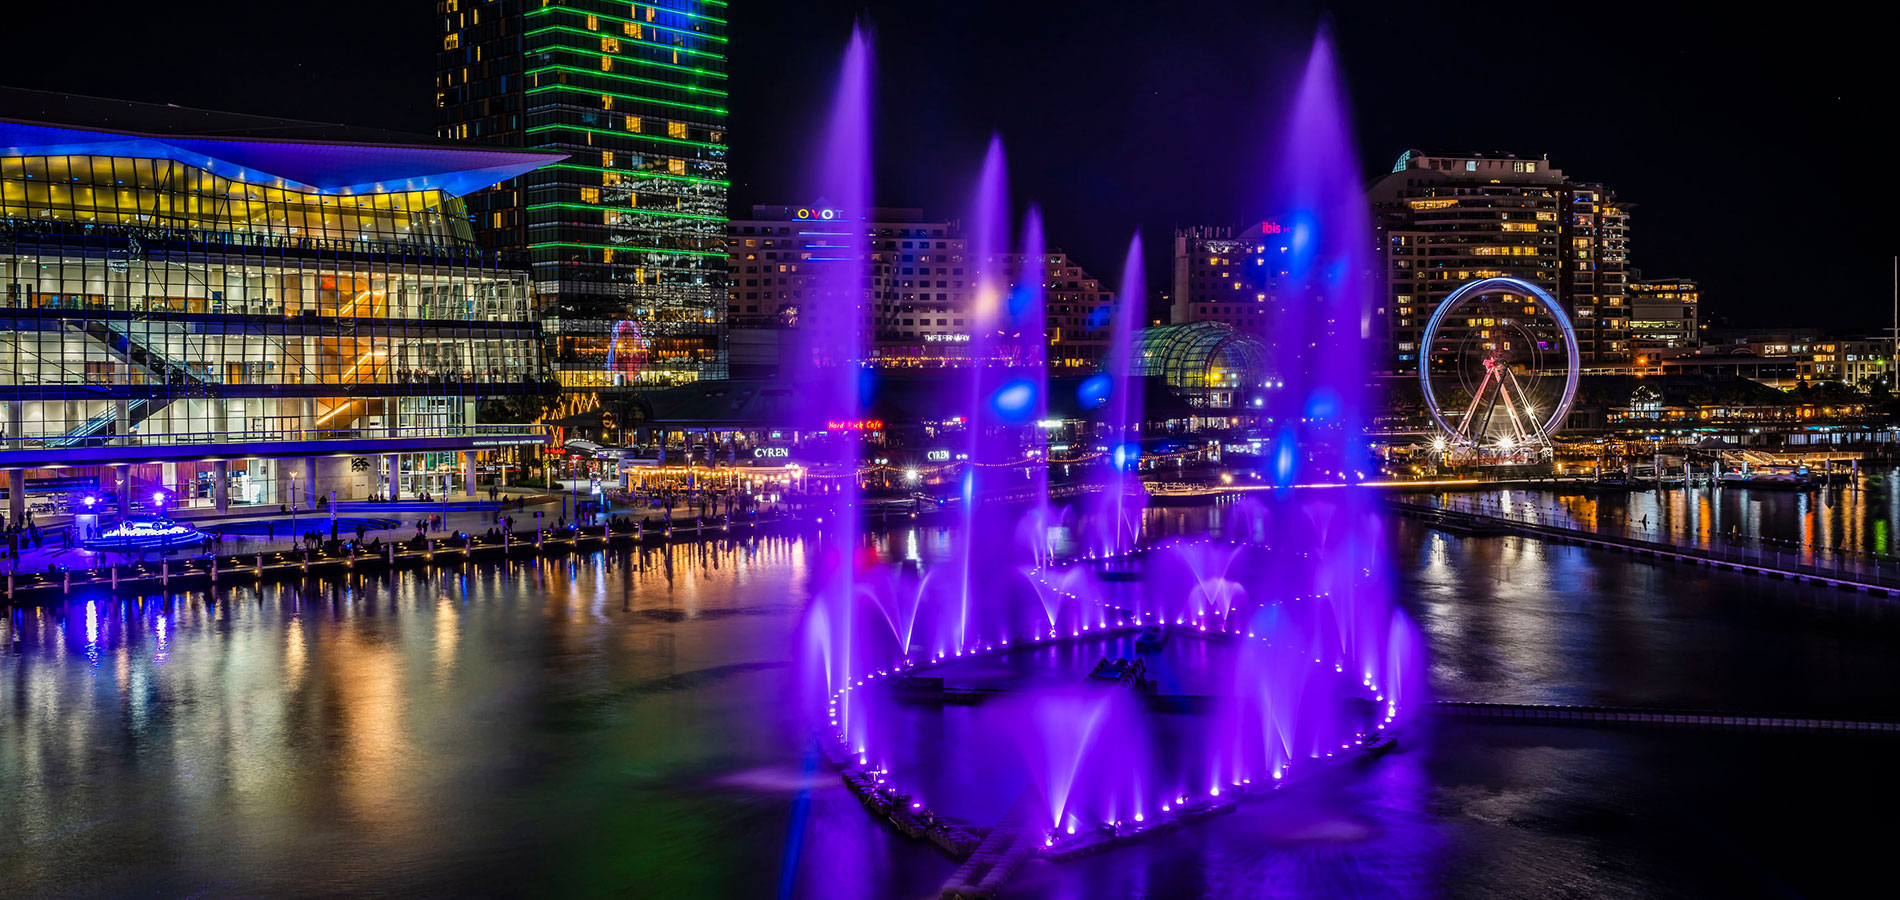 This is an image of the Sydney Infinity installation at Vivid Sydney